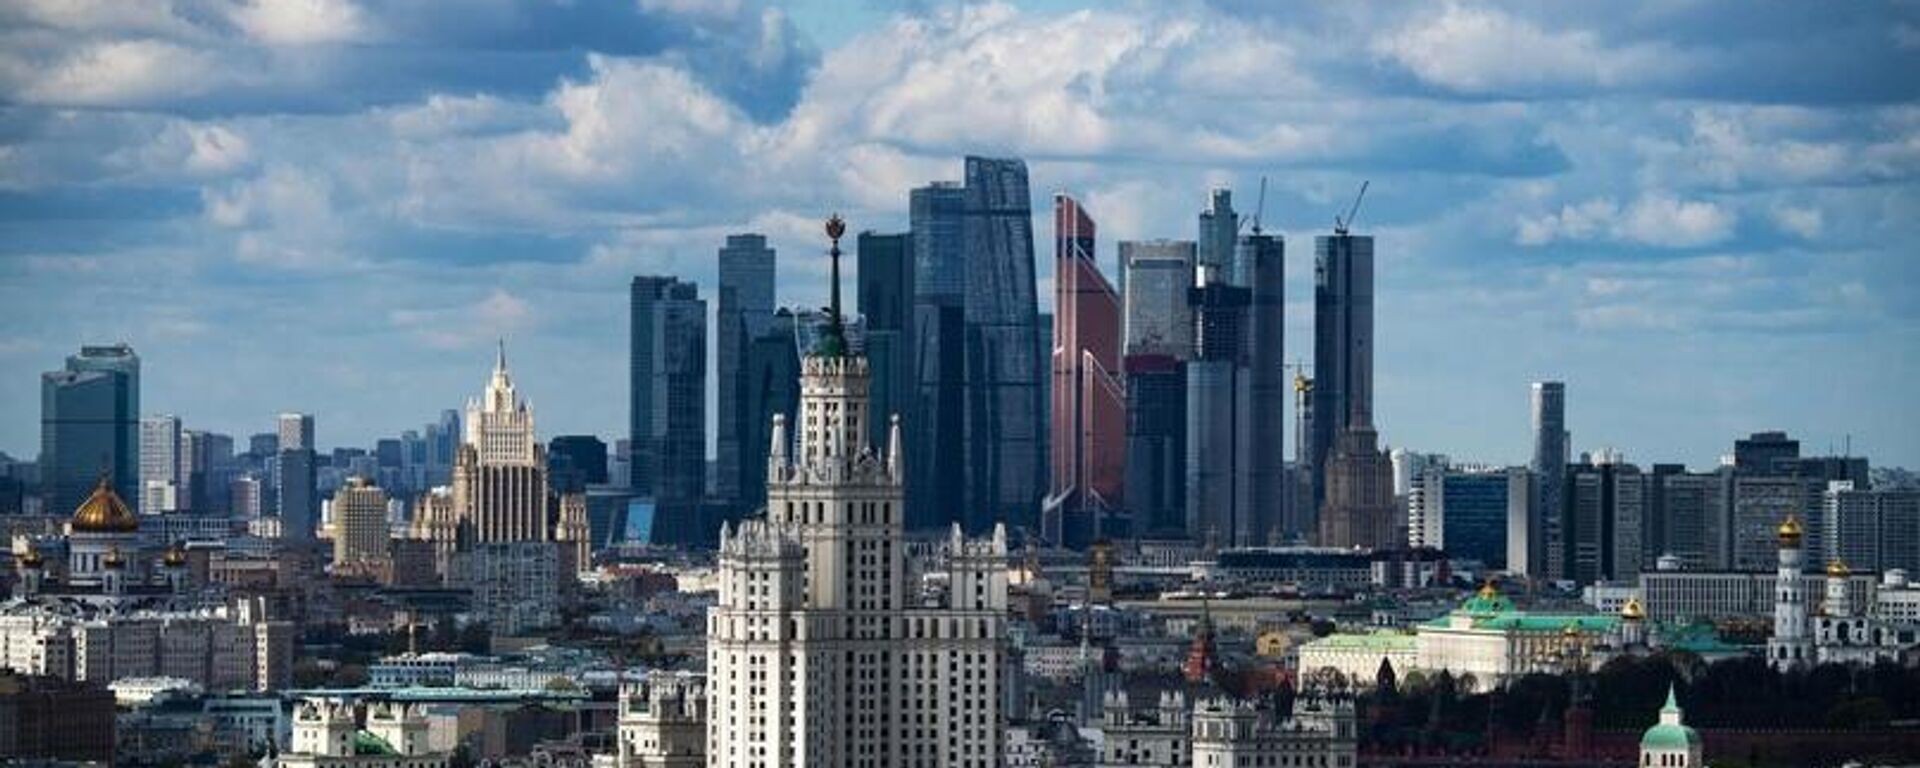 A general view shows the Soviet era skyscraper on Kotelnicheskaya Embankment of the Moskva river, Foreign ministry headquarters, Radisson Royal Hotel Moscow, the Christ the Savior cathedral and the Kremlin, with the Moscow International Business Centre, also known as Moskva-City, seen in te background, in Moscow, Russia - Sputnik International, 1920, 25.03.2023